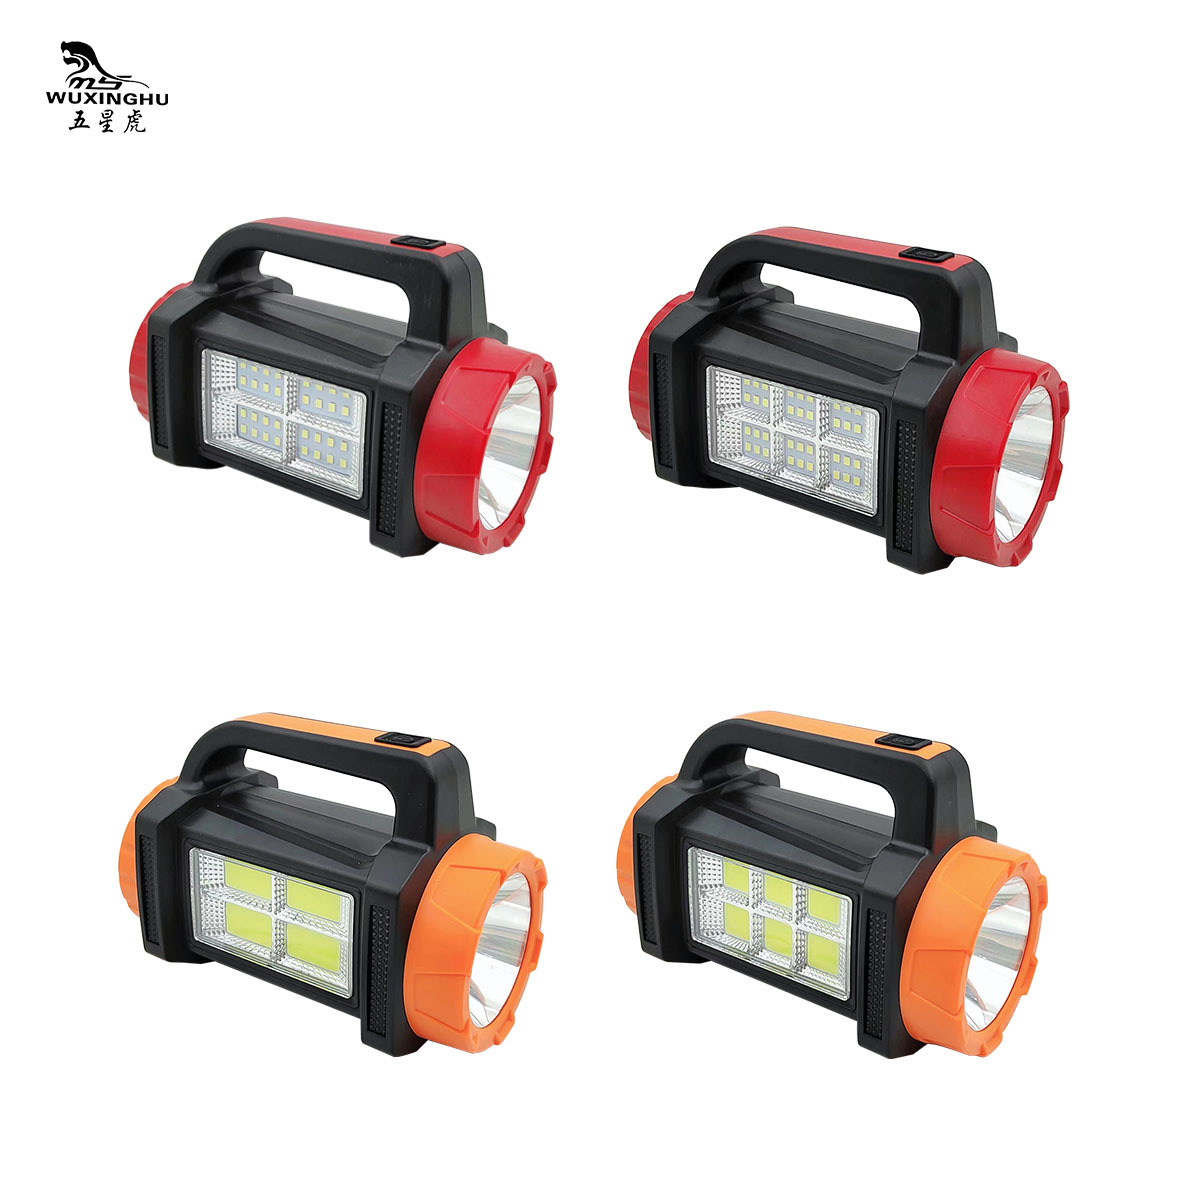 New Multifunctional Outdoor Solar Portable Lamp Multi-Gear Light LED/Cob with Output Emergency Light Camping Lantern